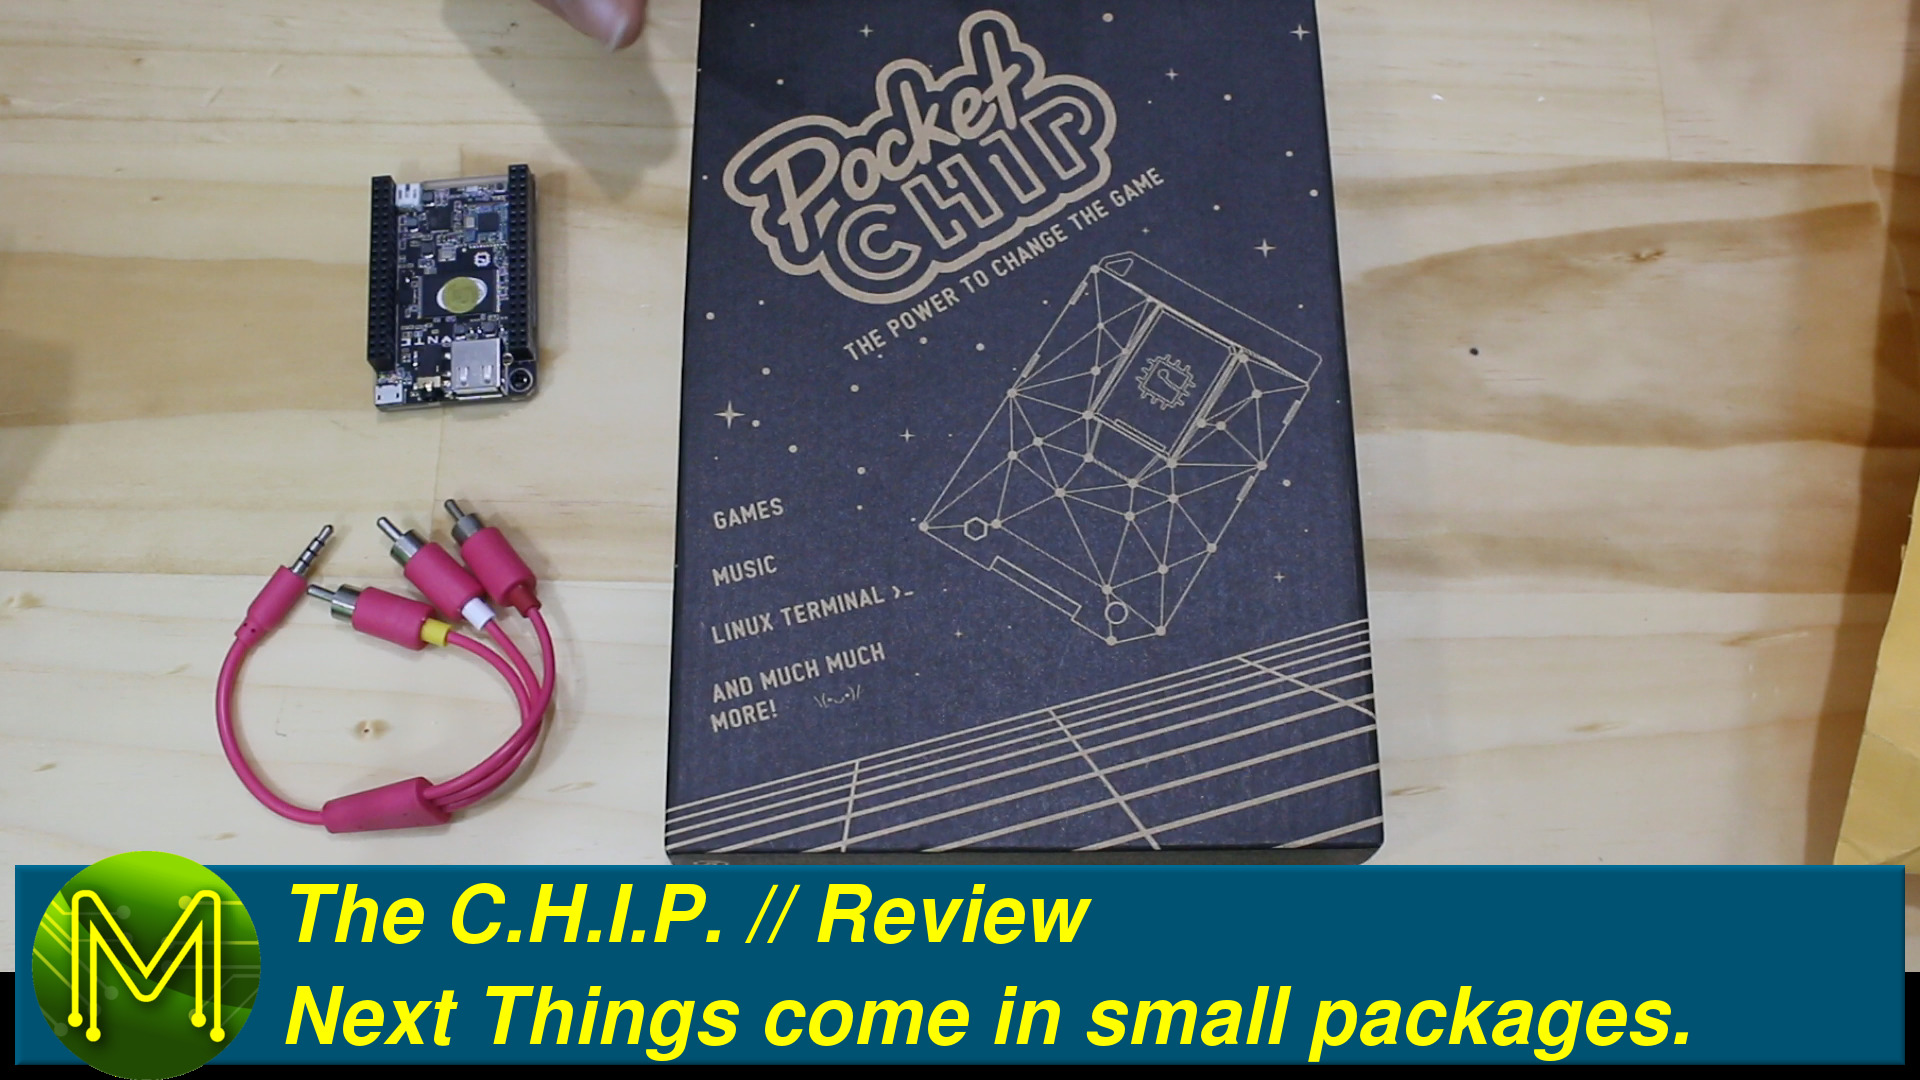 The C.H.I.P.: Next Things come in small packages. // Review